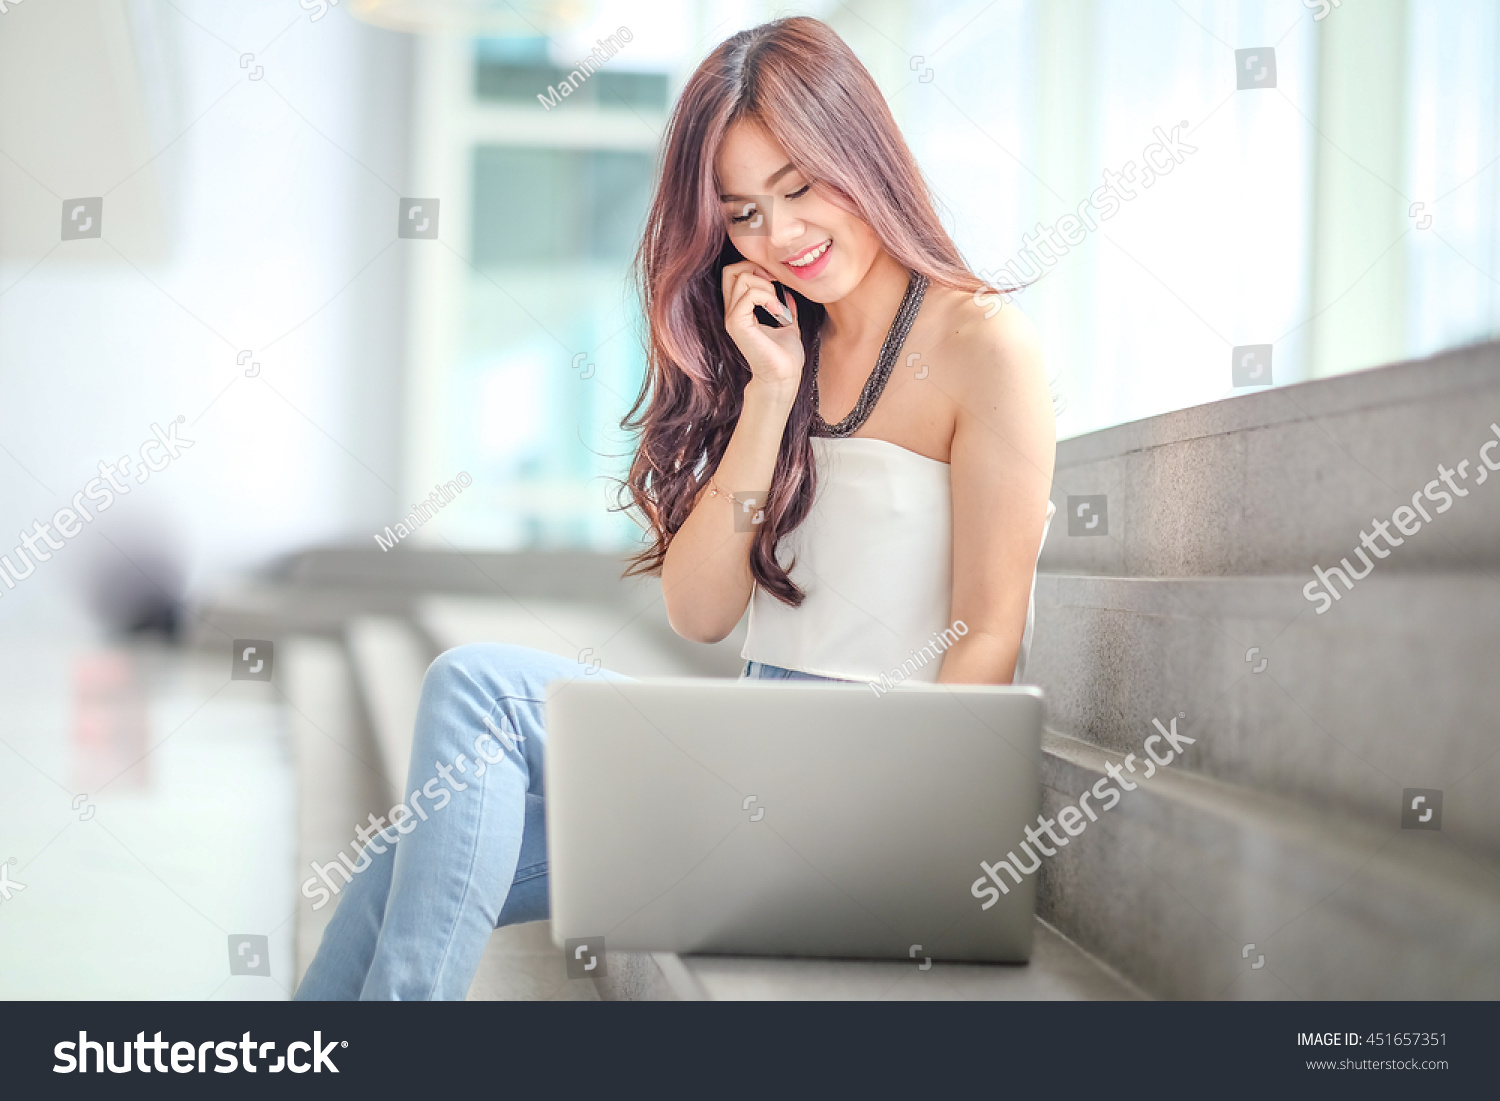 Portrait of a casual young businesswoman using laptop computer in office #451657351